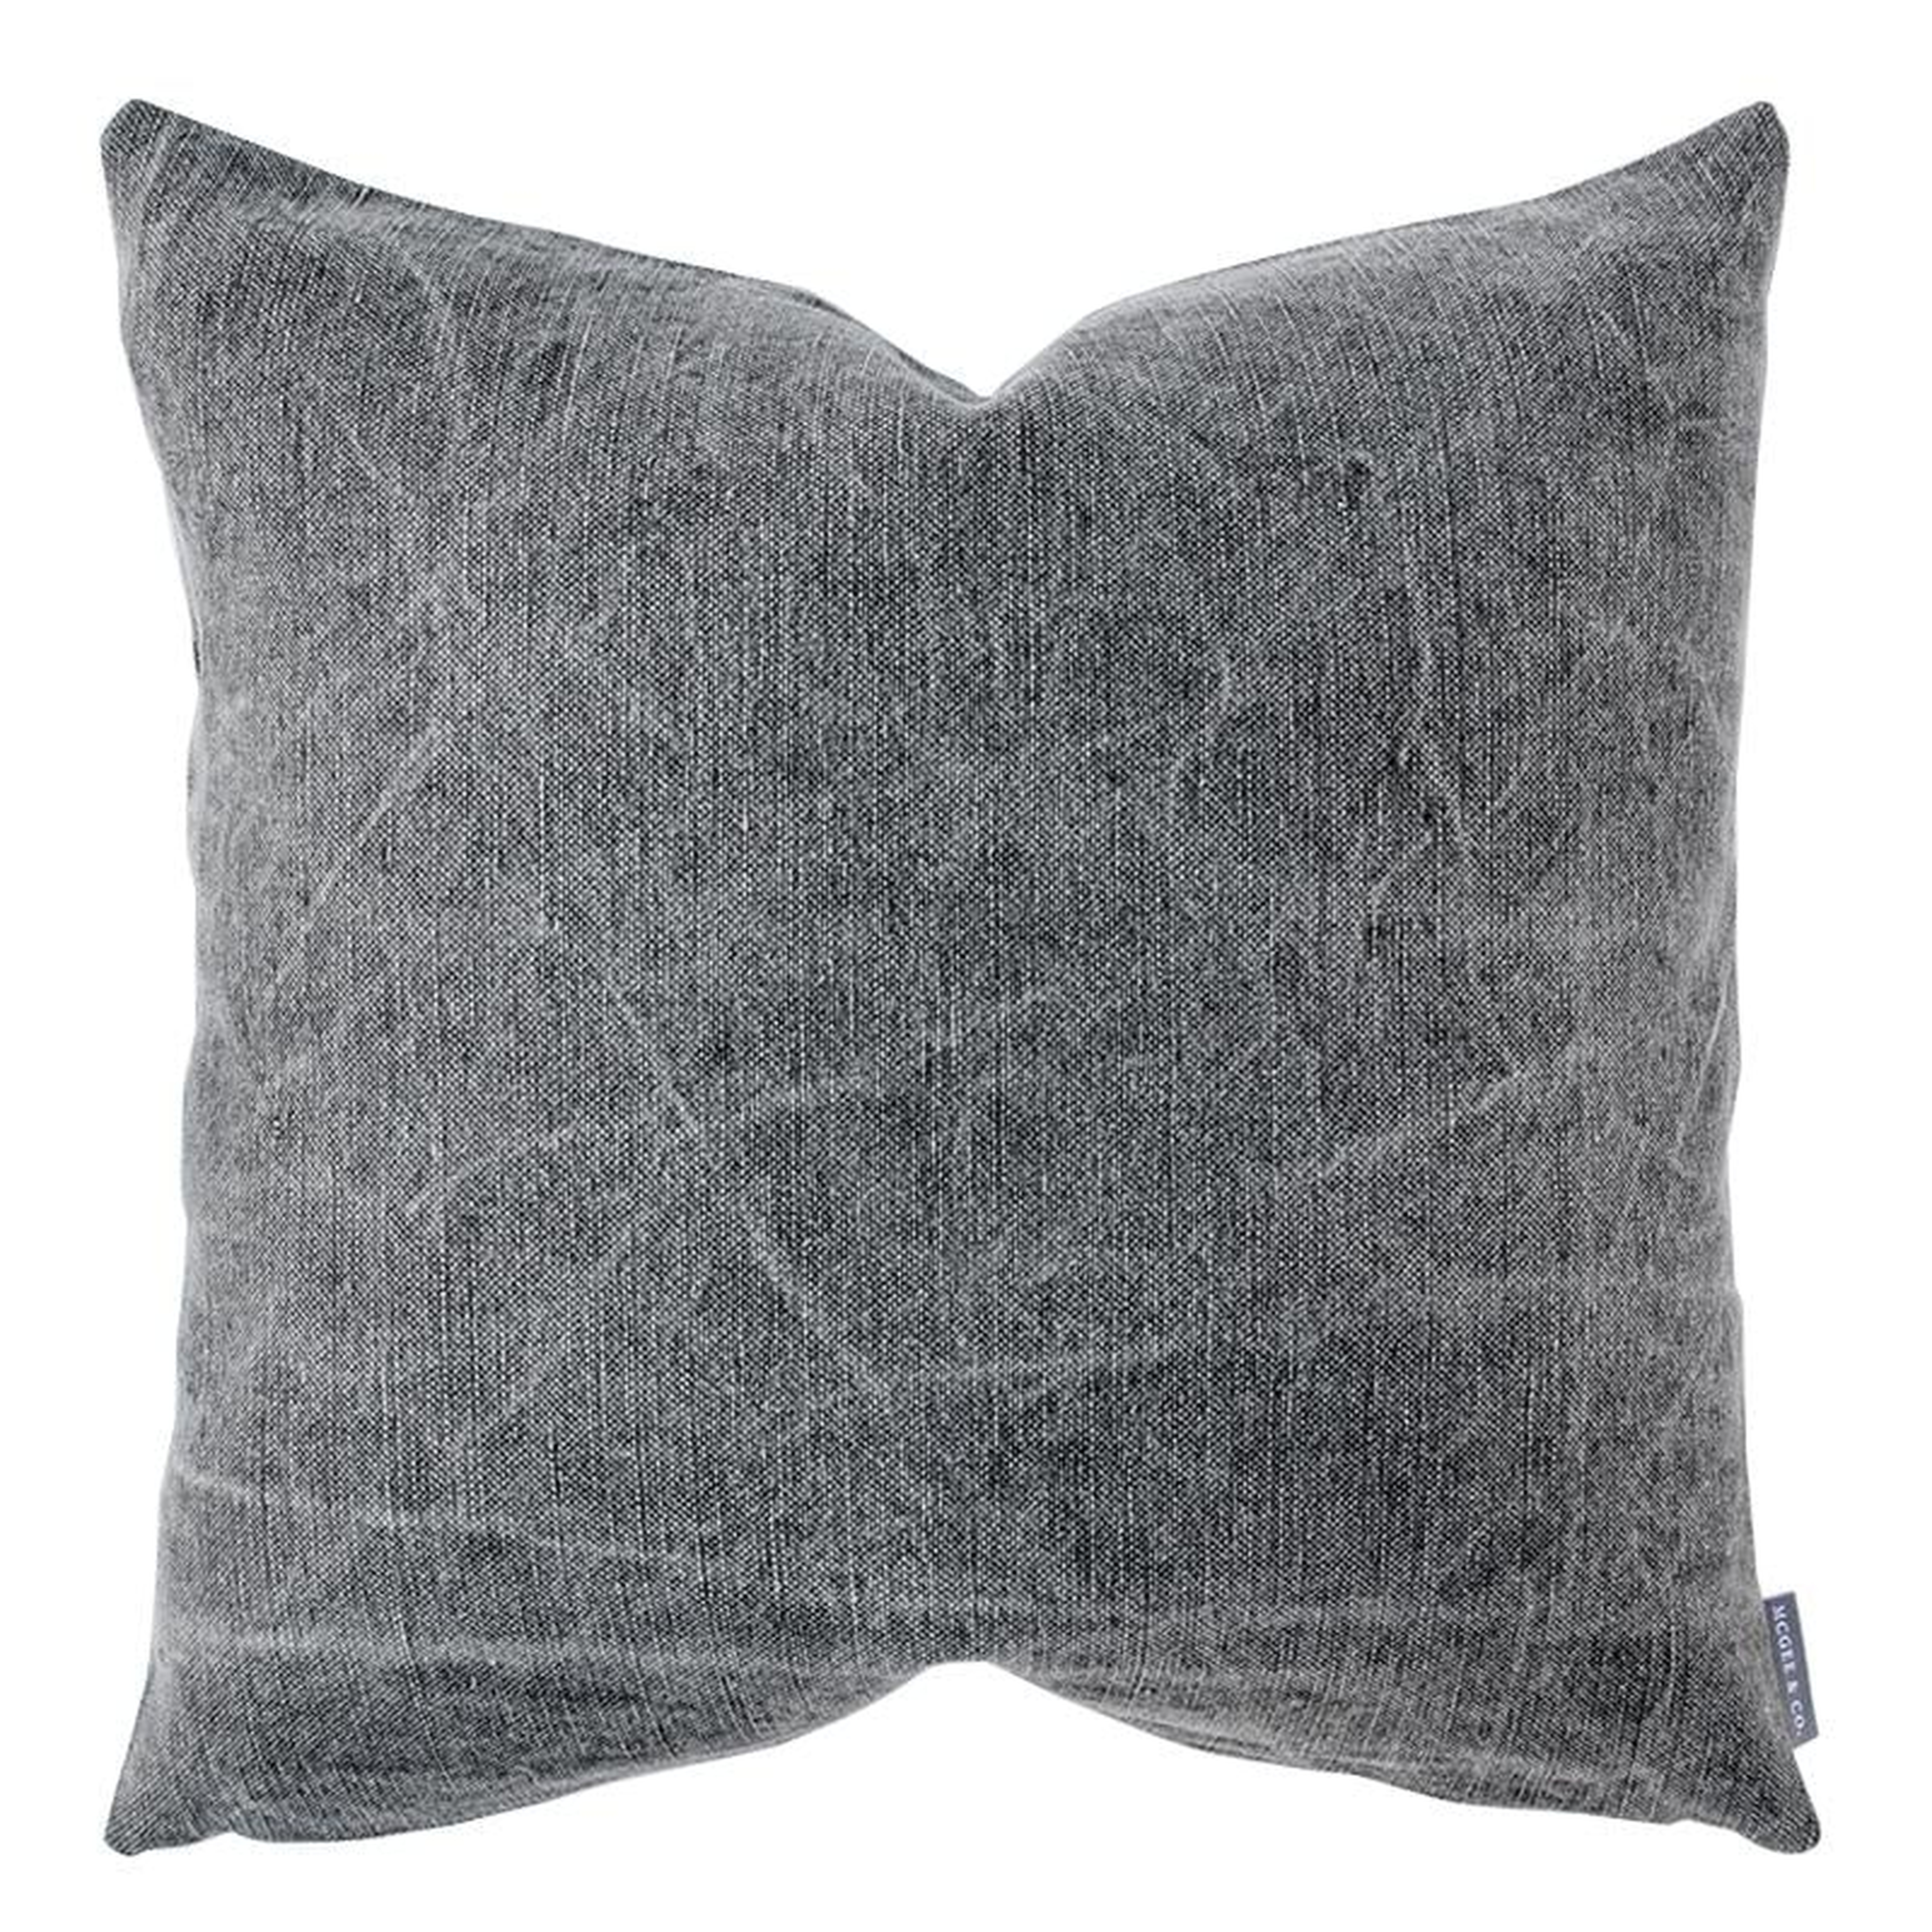 THOREAU PILLOW WITHOUT INSERT, 20" x 20" - McGee & Co.